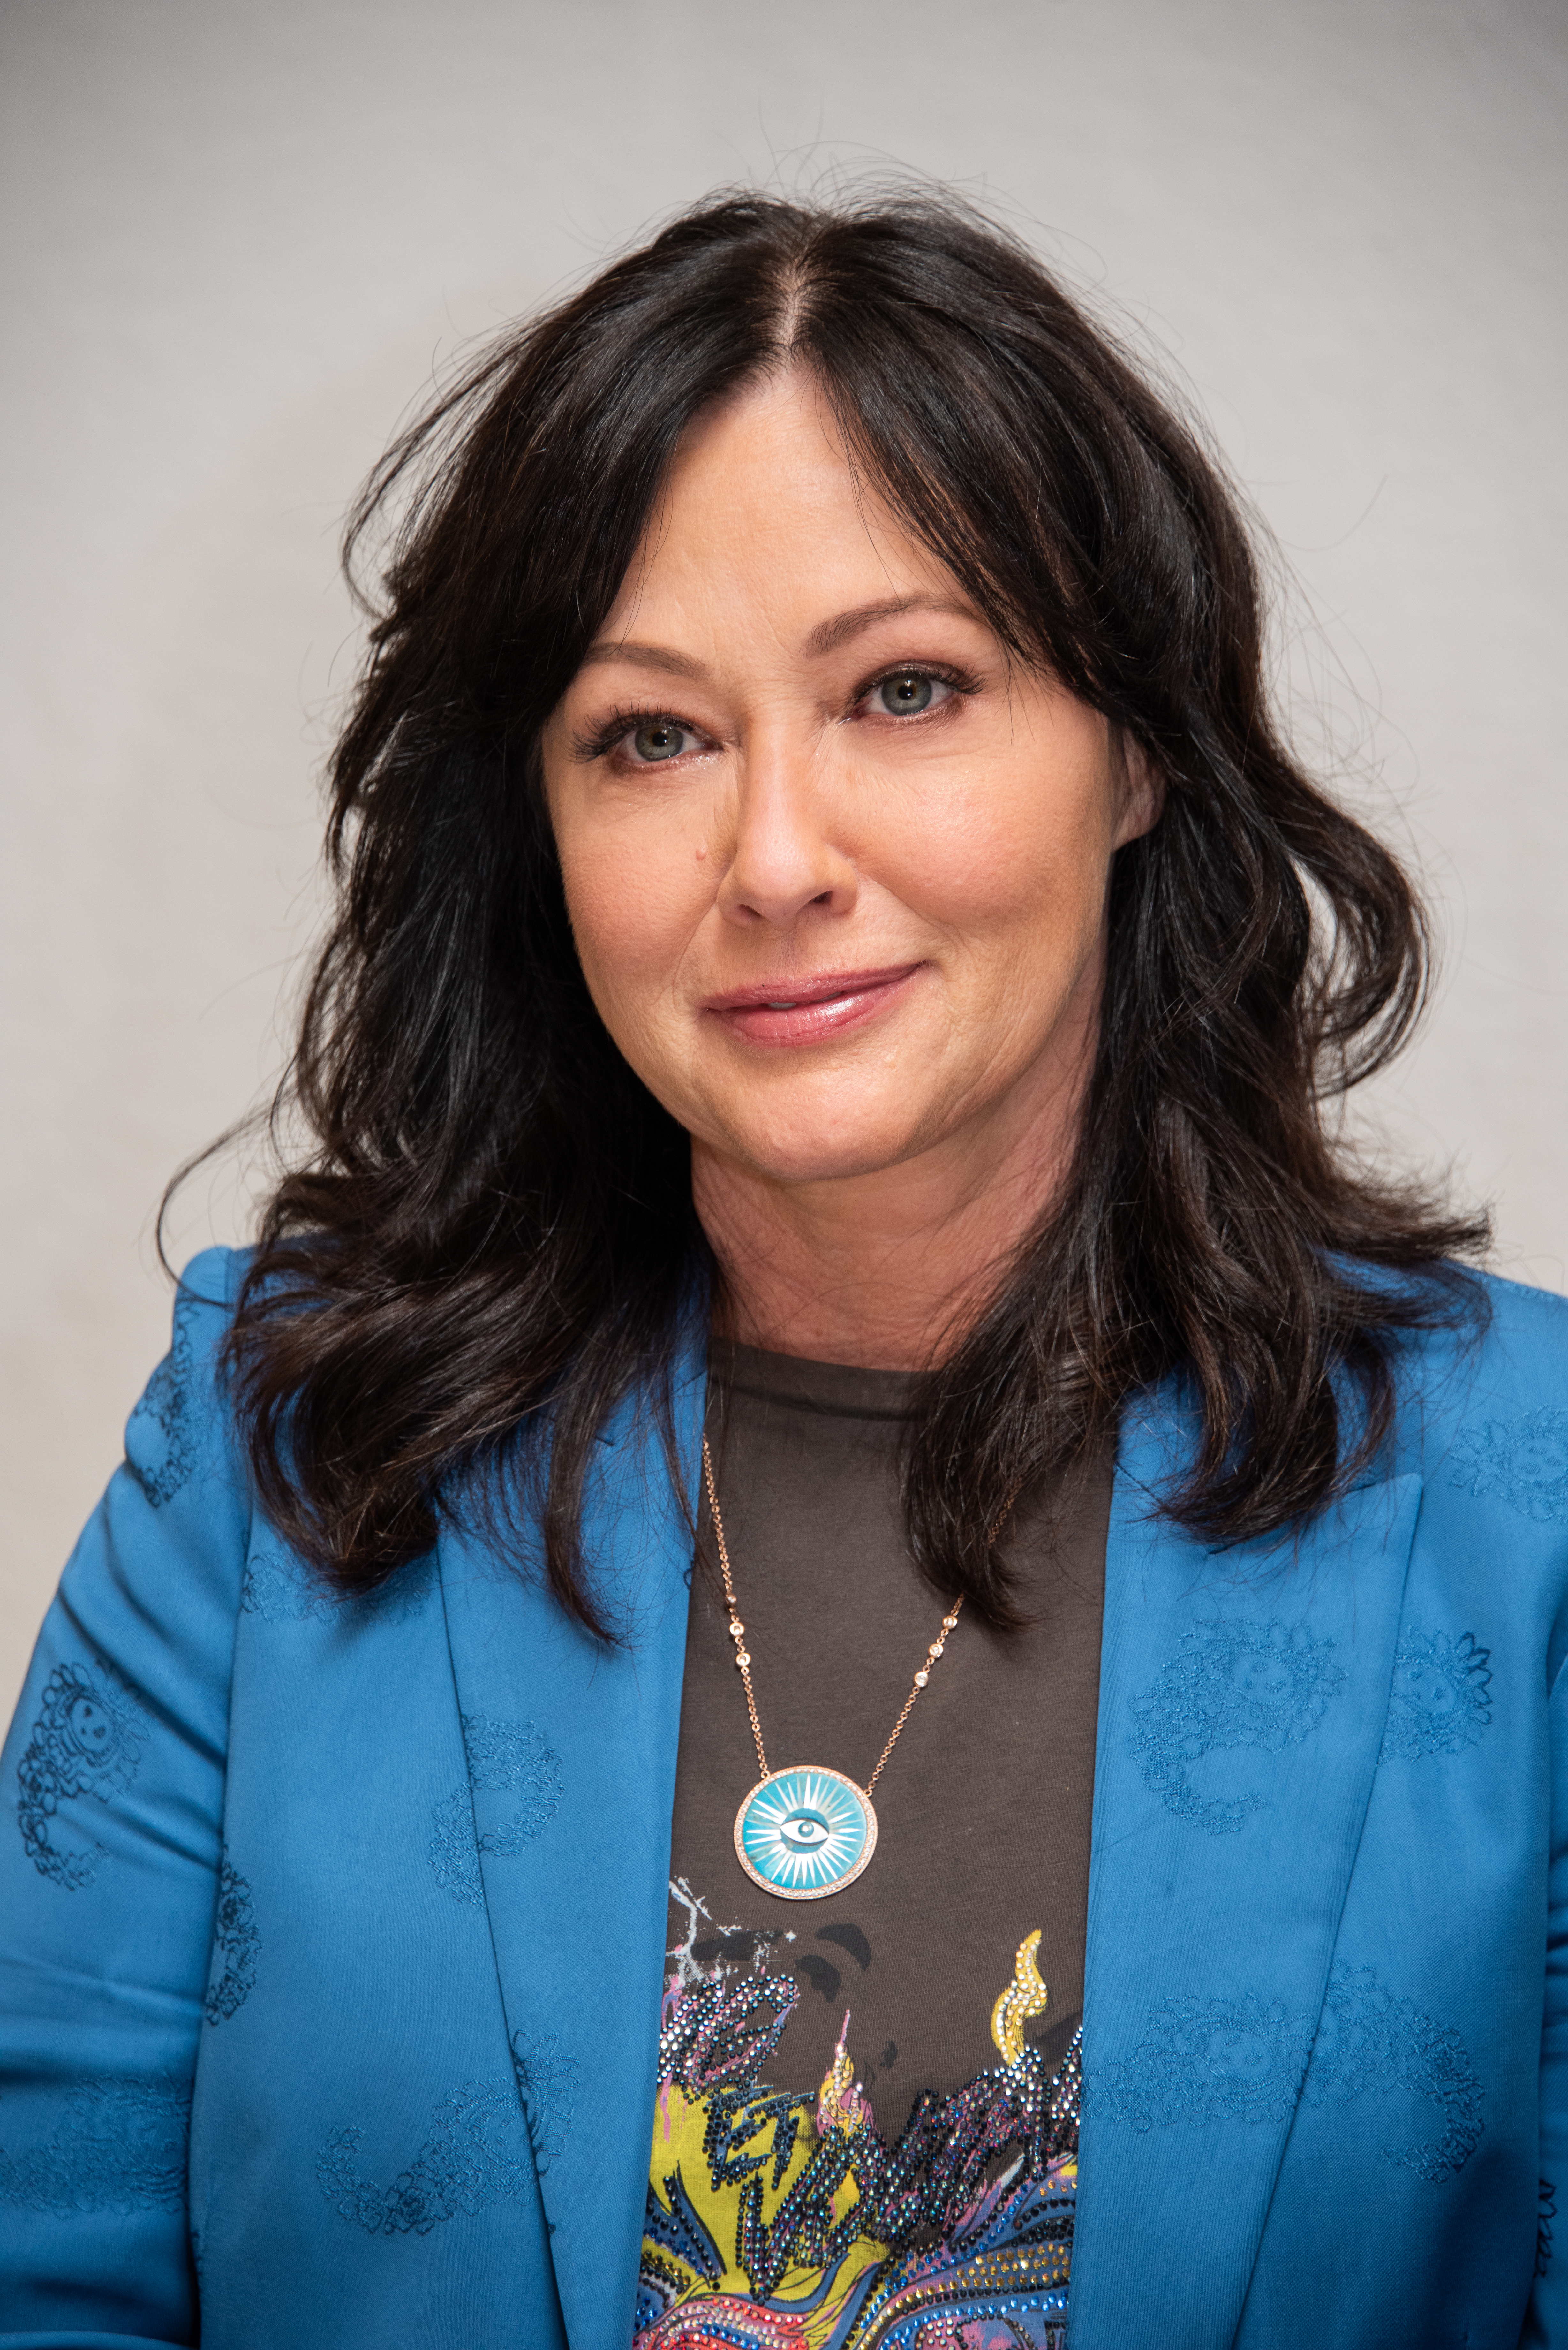 Shannen Doherty at the "BH90210" Press Conference, hosted at the Four Seasons Hotel in Beverly Hills, California, on August 08, 2019 | Source: Getty Images